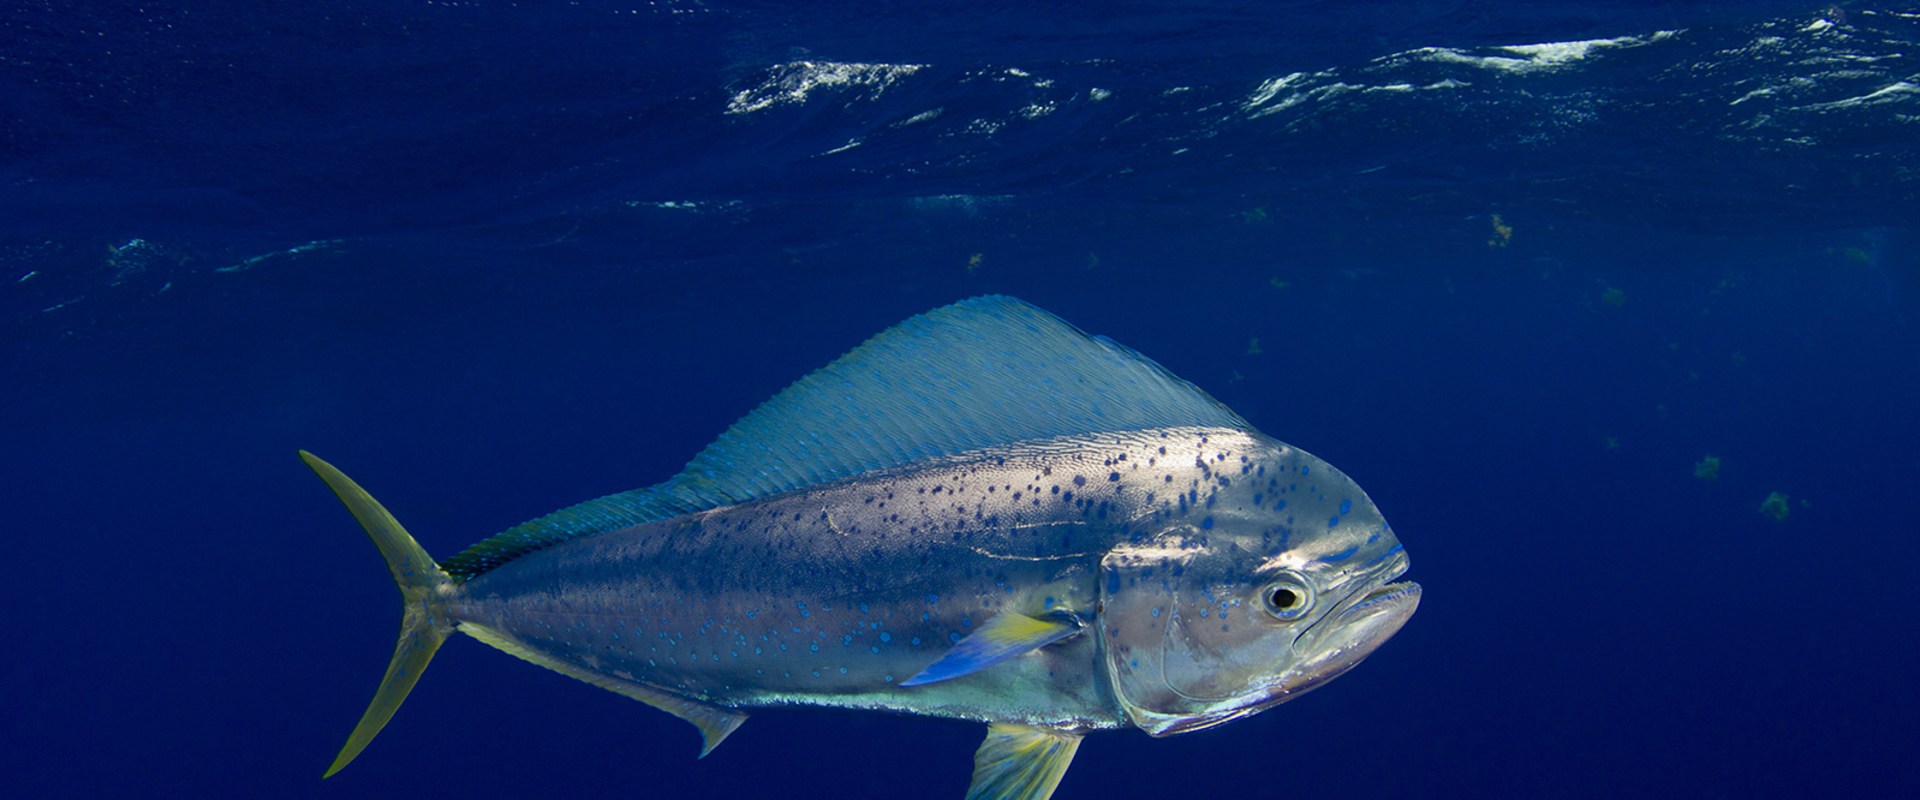 Where is the best saltwater fishing in the world?